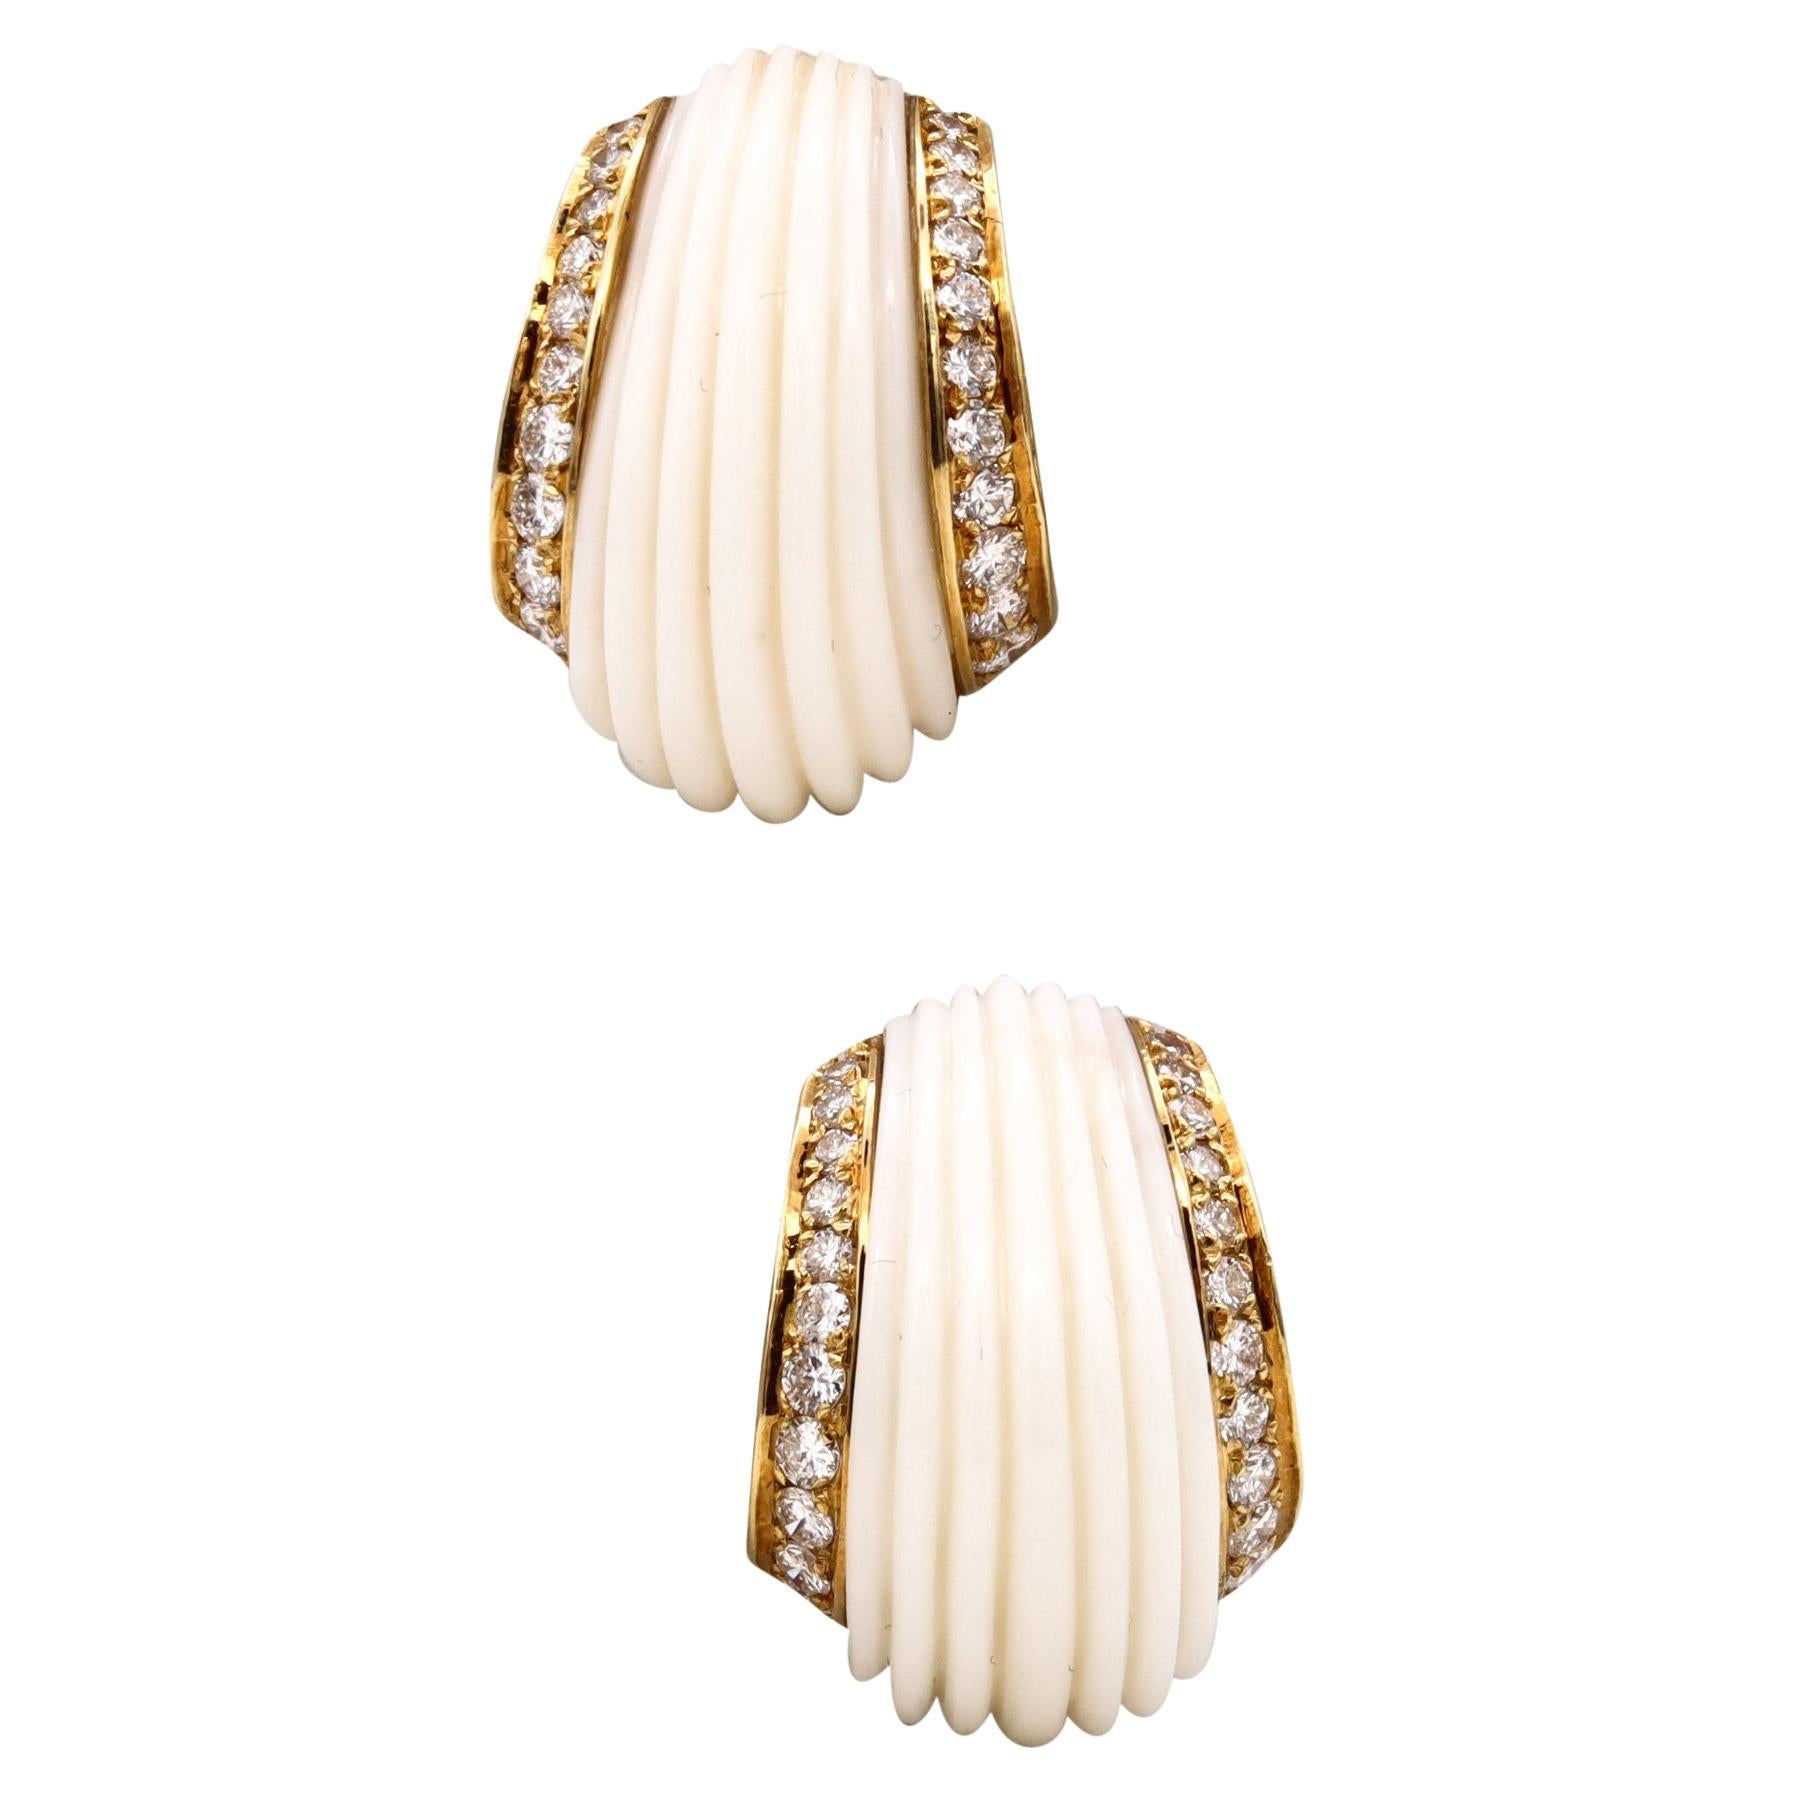 Charles Turi New York 18kt Gold Earrings with 2.42 Cts in Diamonds White Coral